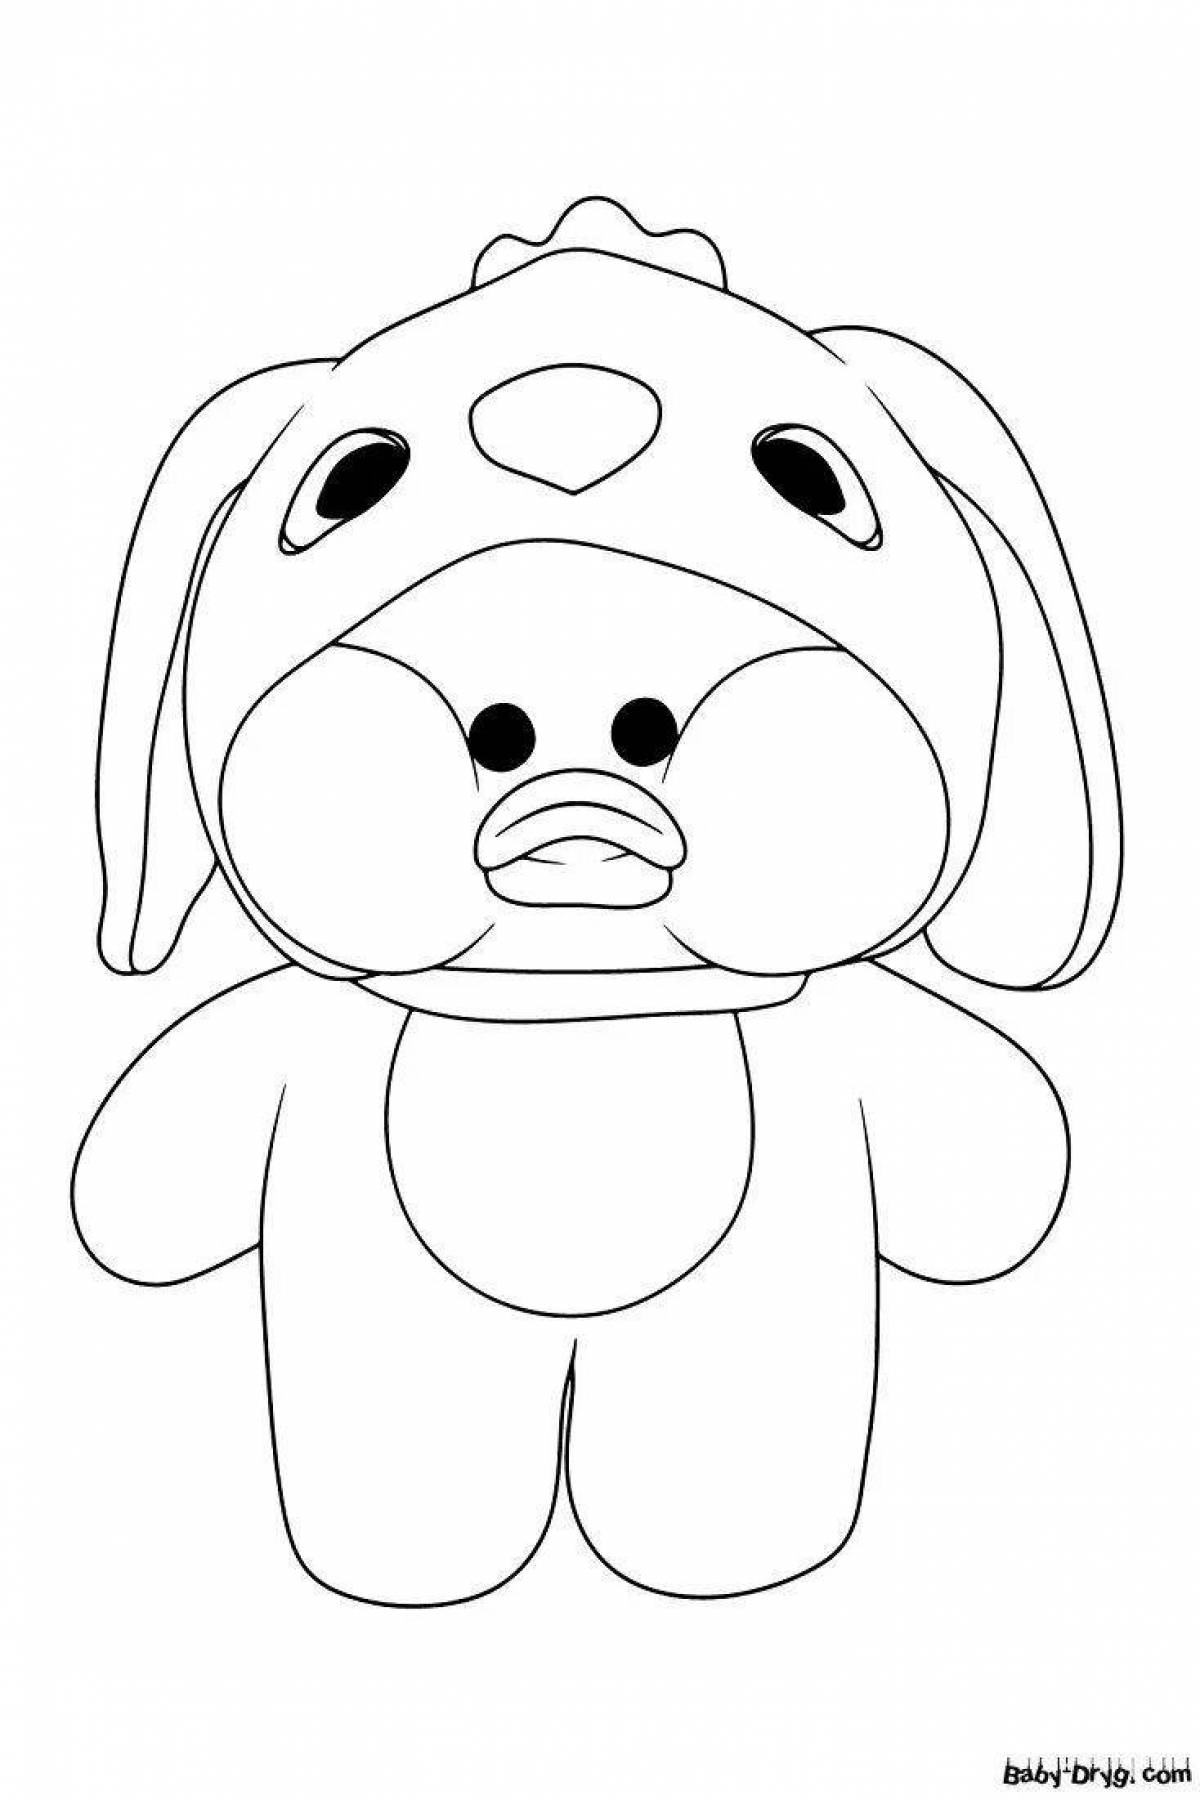 Coloring page adorable lalaphan duck